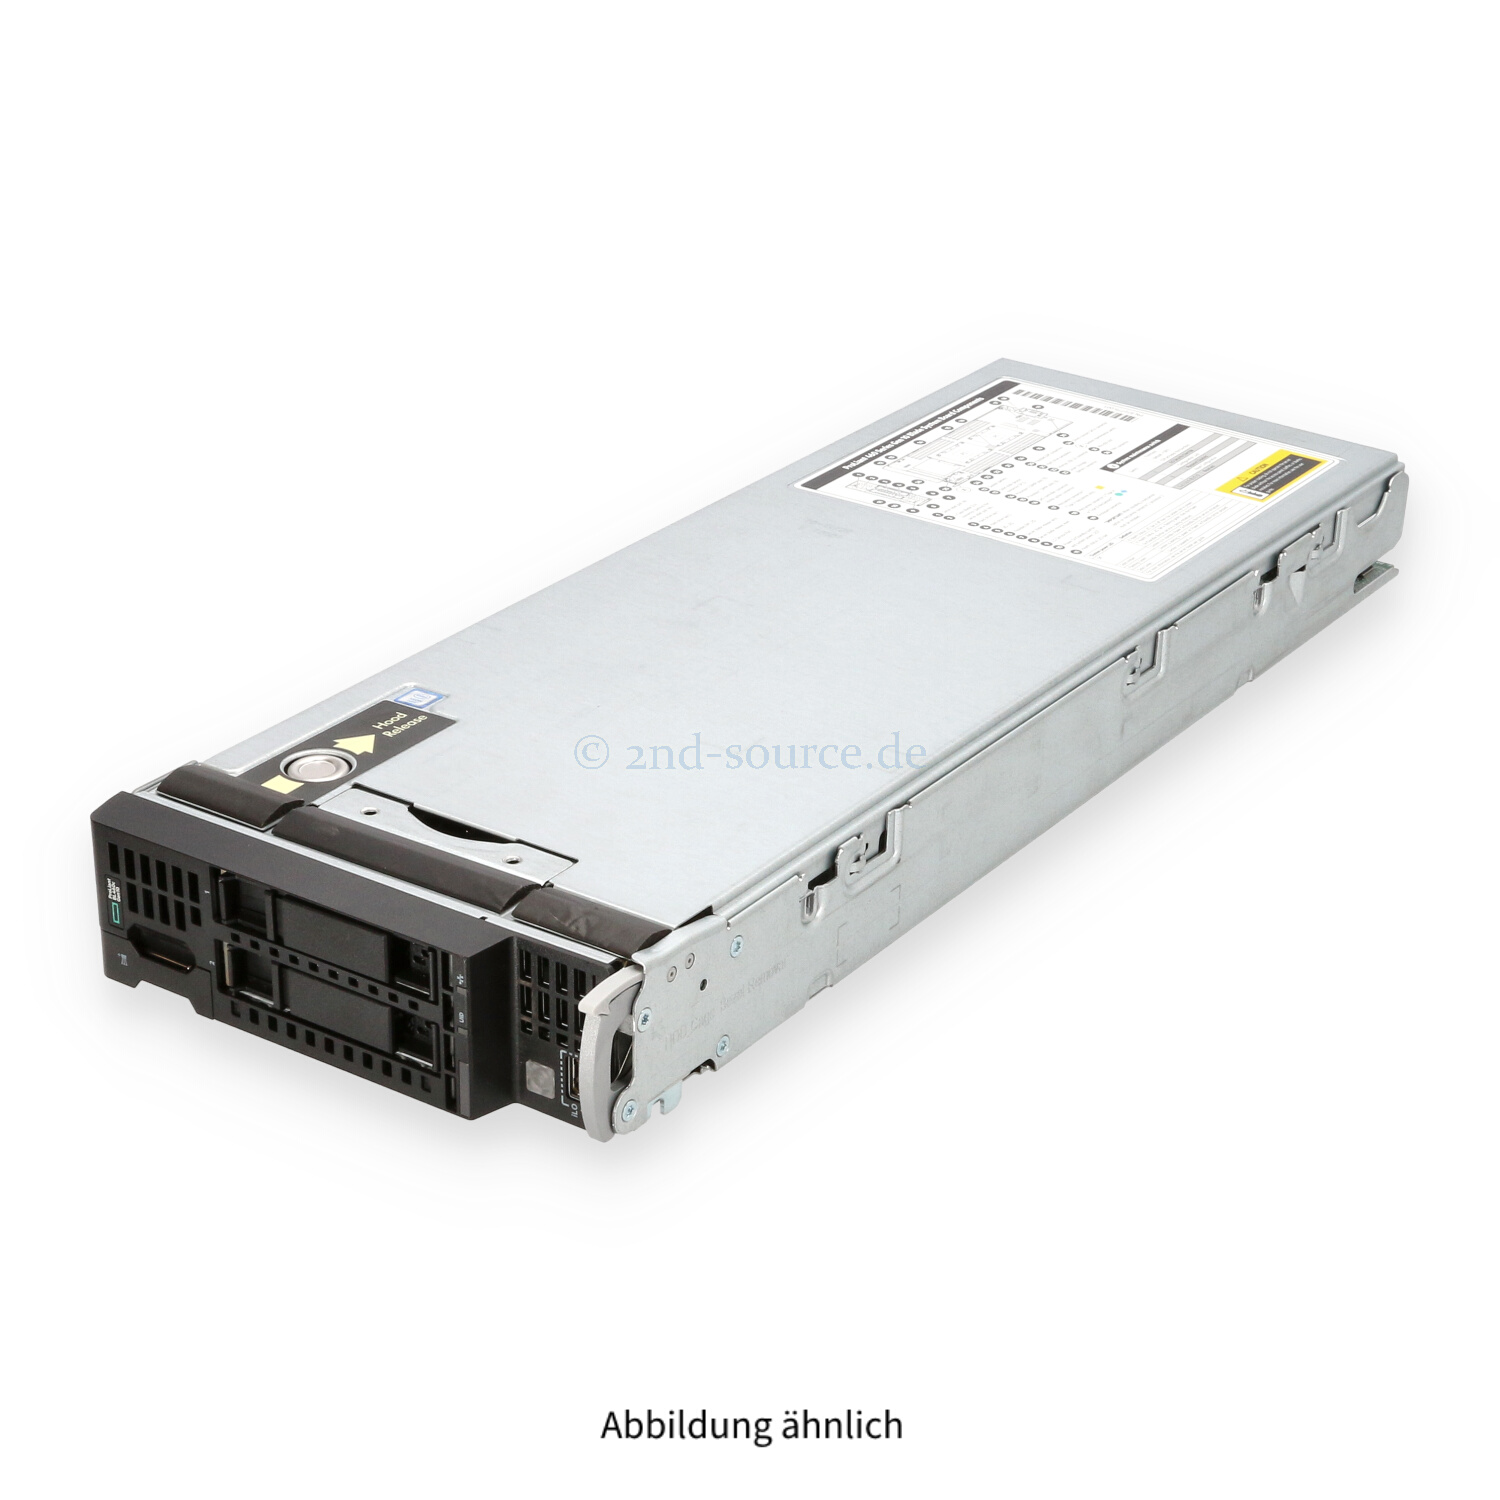 HPE BL460c G10 2xSFF P204i-b 2x HS CTO Chassis 863442-B21